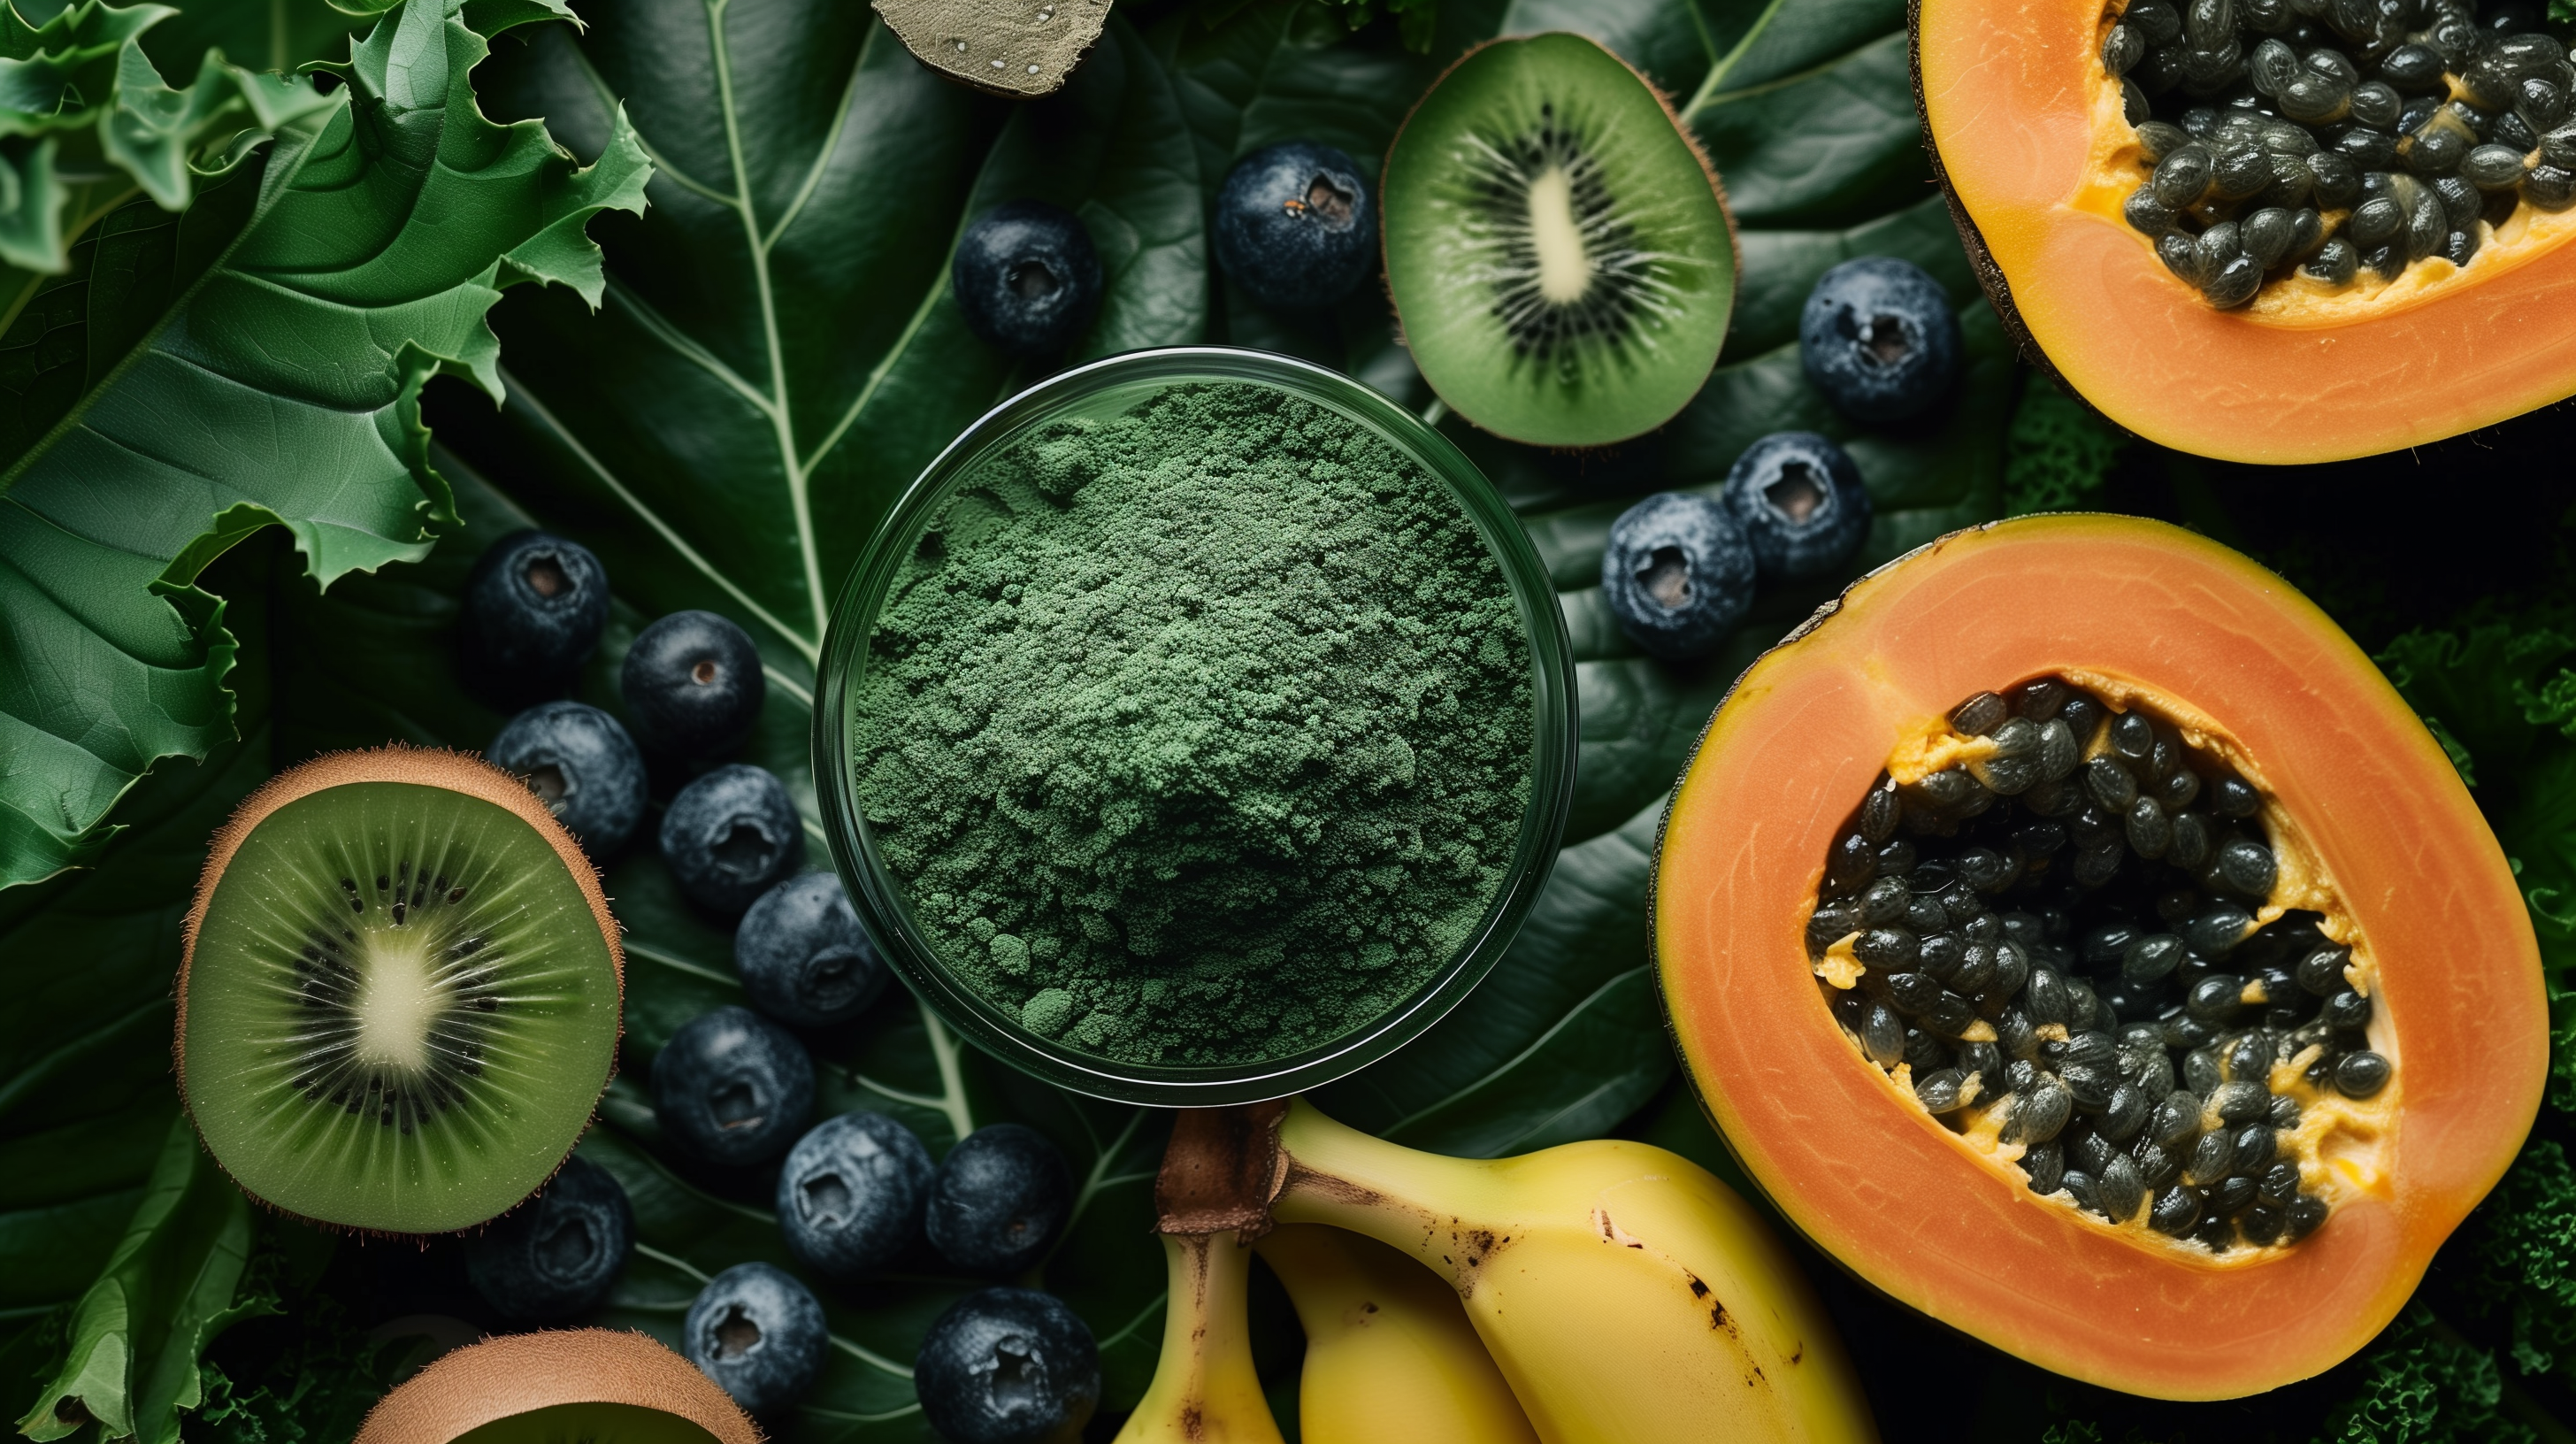 vibrant scoop of green superfood powder overflowing, surrounded by an array of gut-friendly fruits